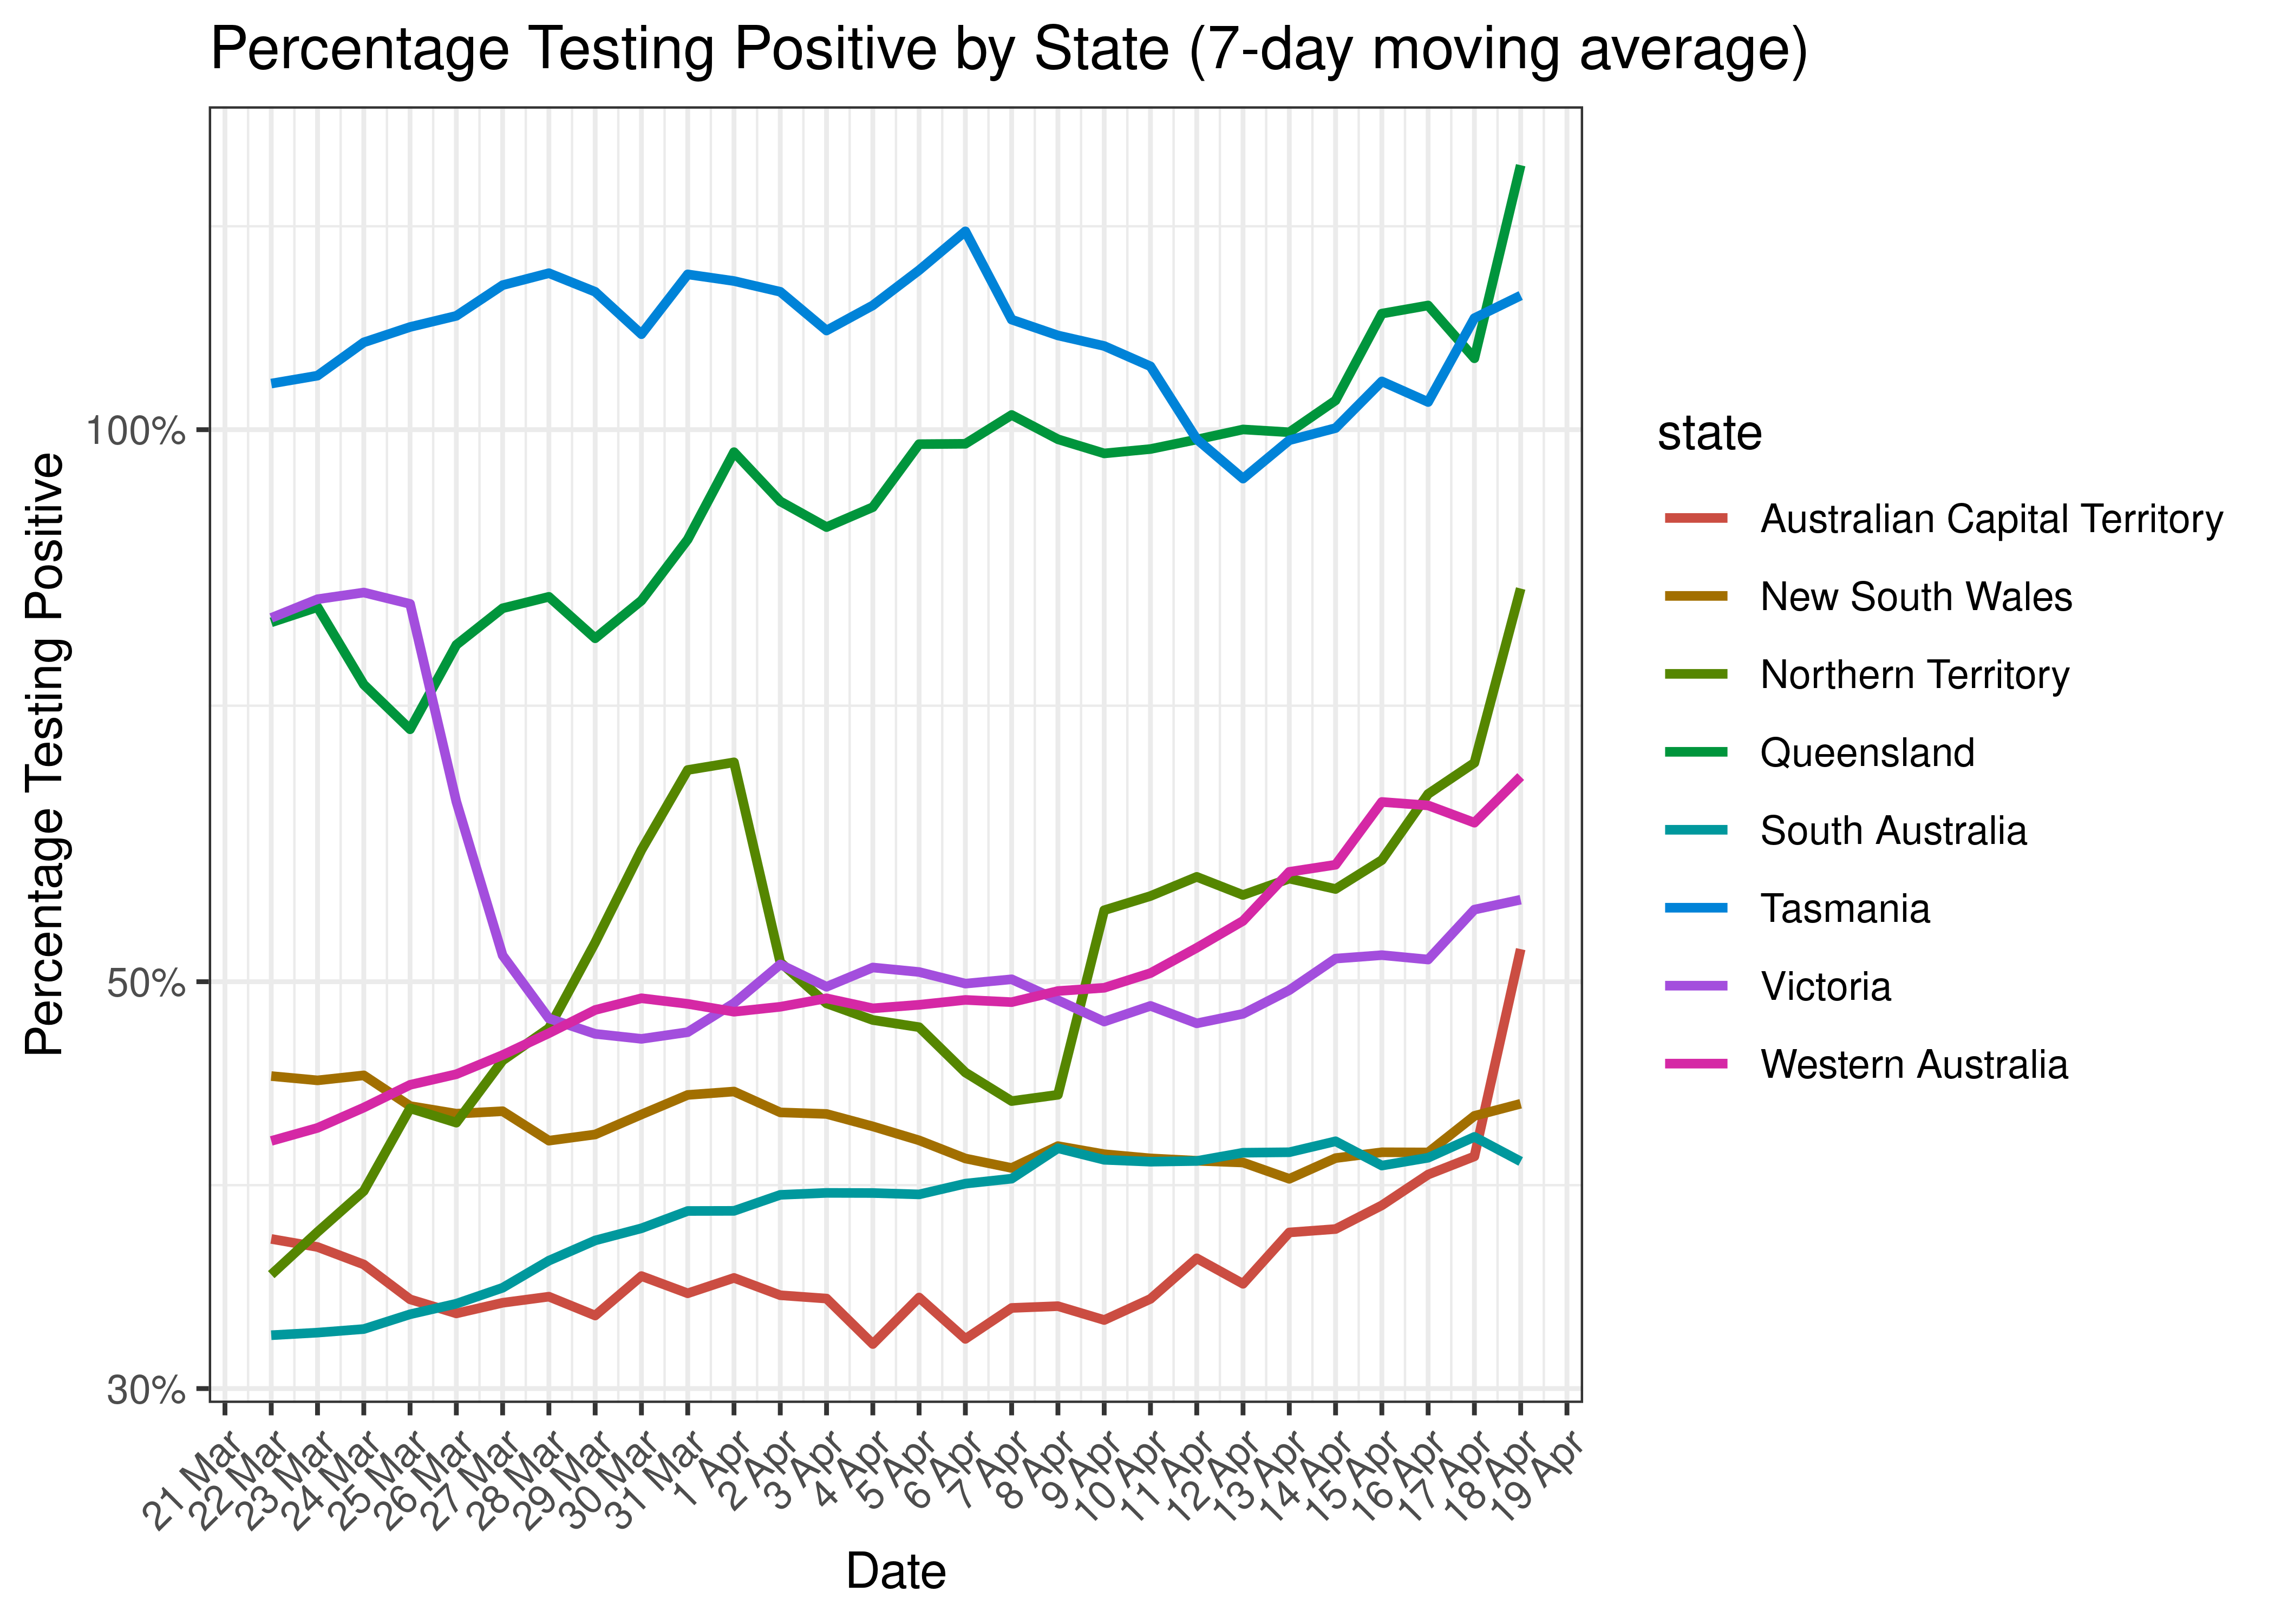 Percentage Testing Positive for Last 30-days by State (7-day moving average)